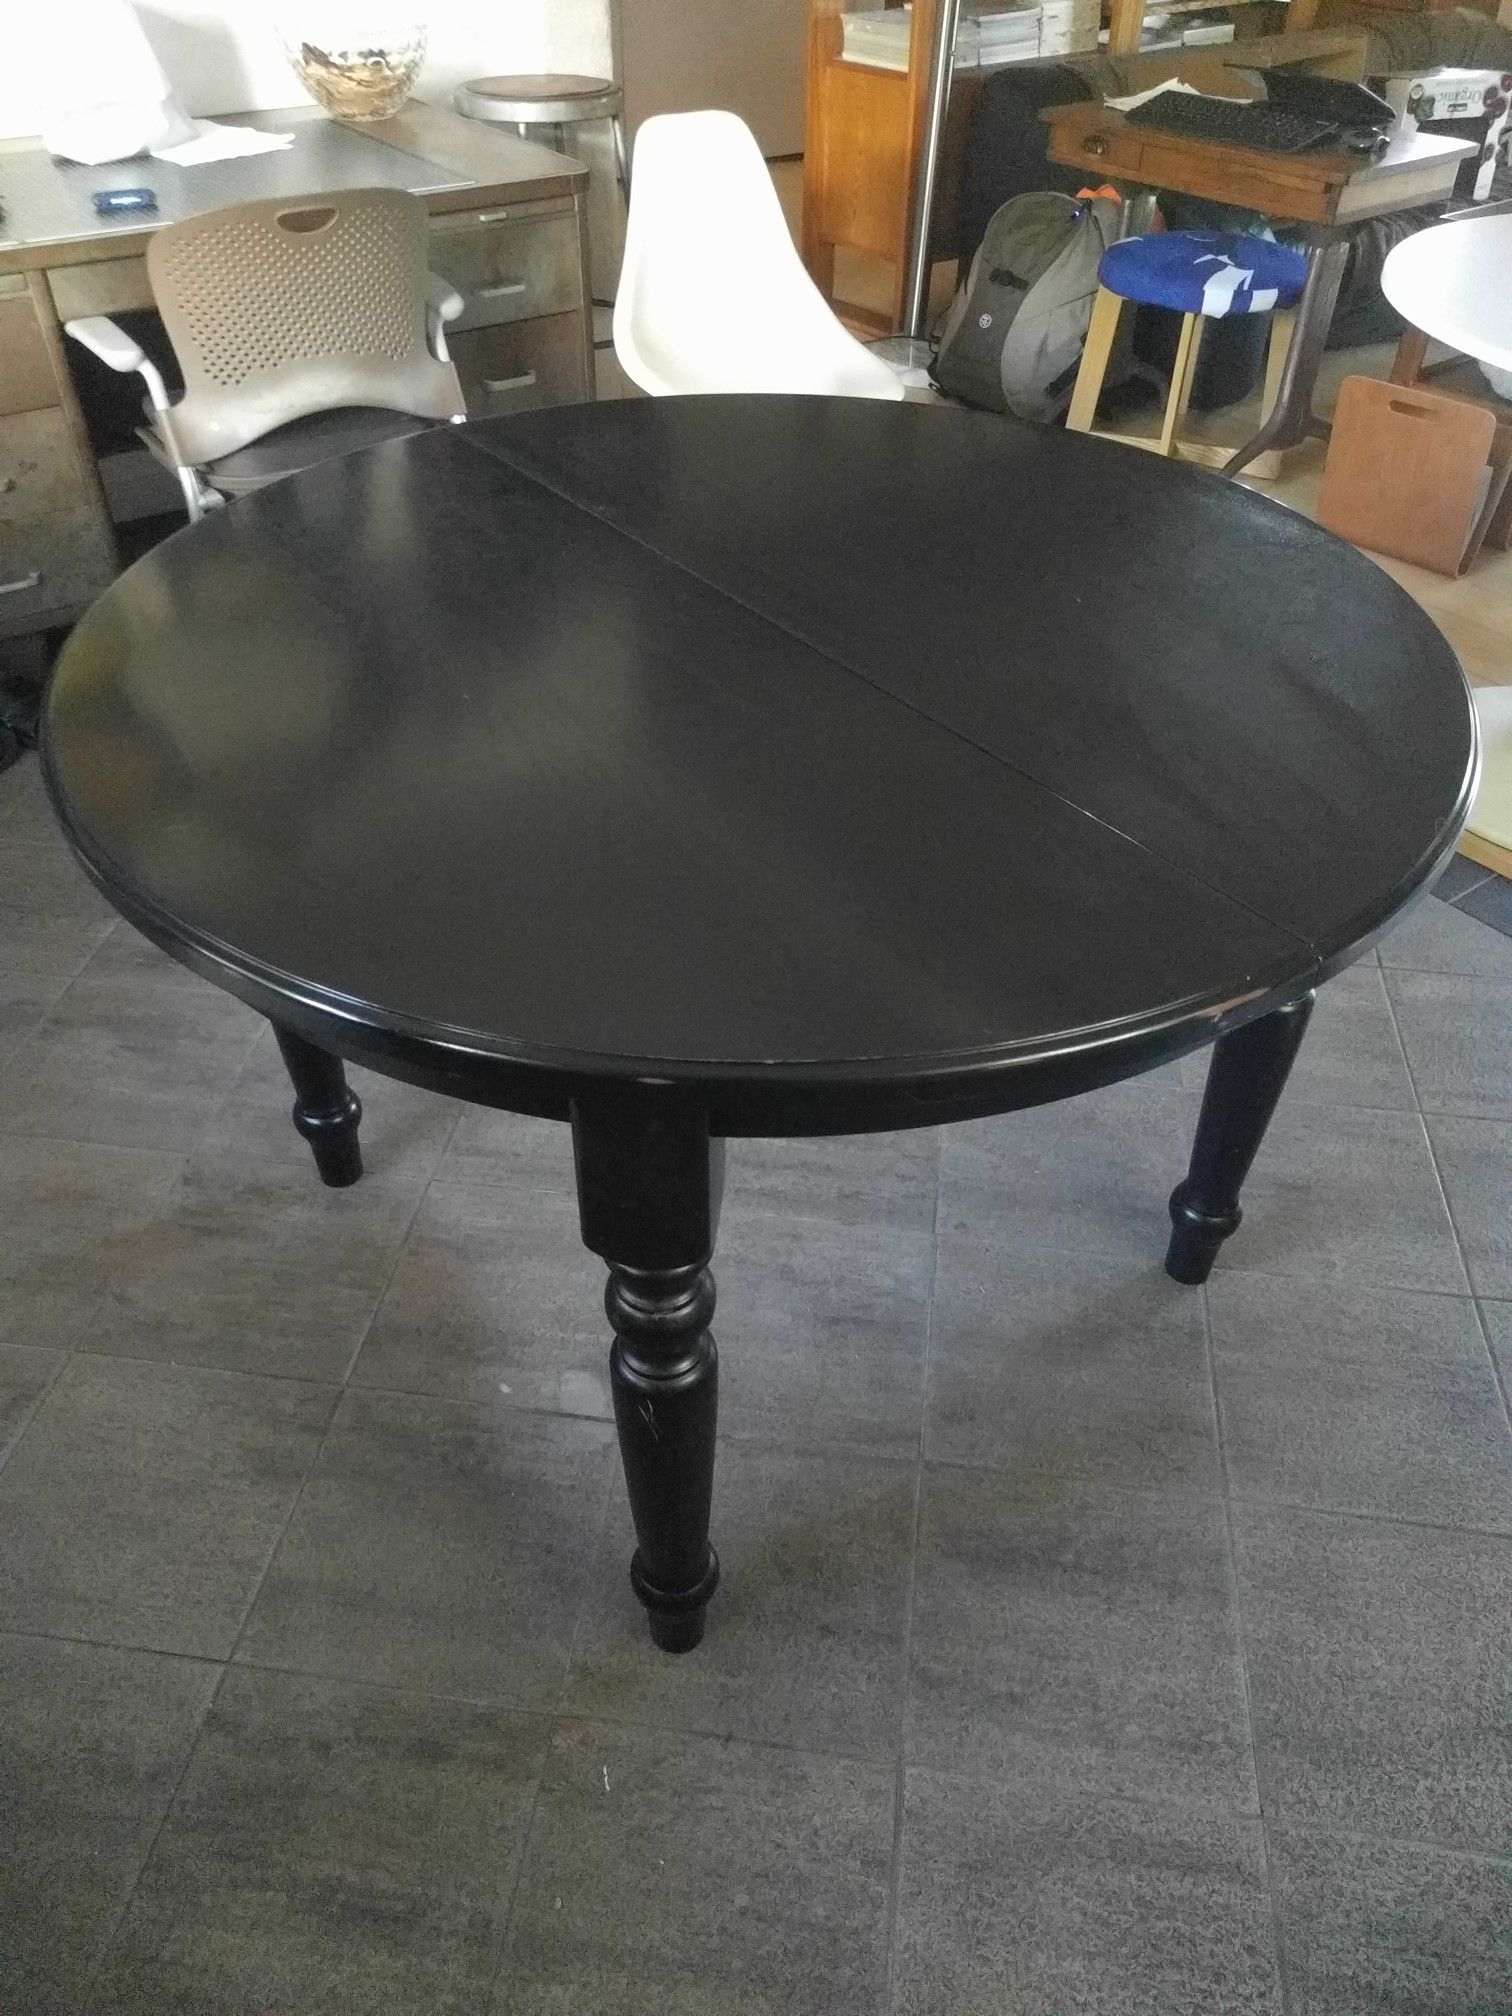 Black table with extendable leaves